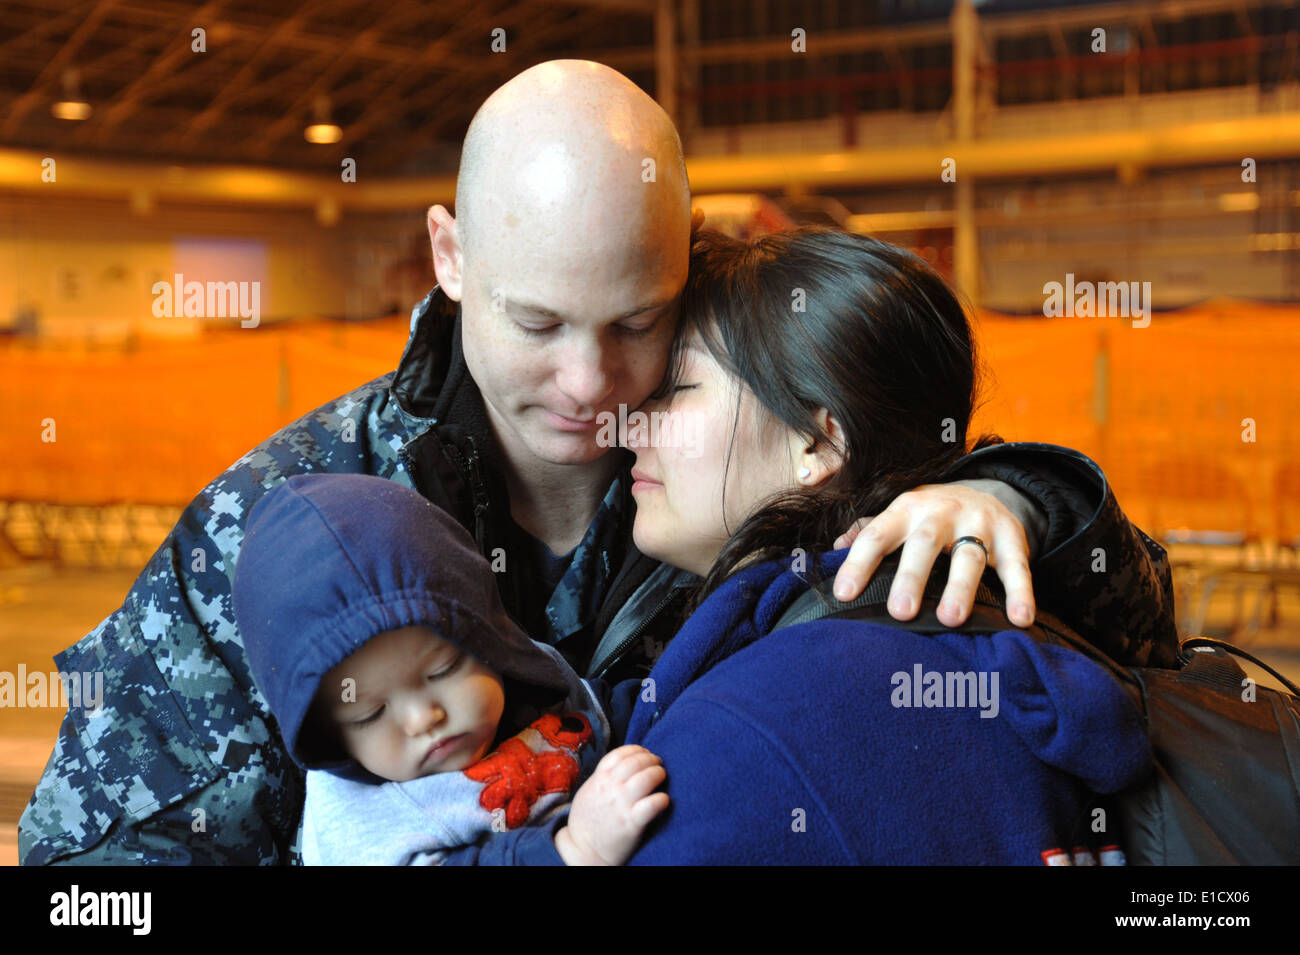 U.S. Navy Master-at-Arms 3rd Class Michael Cassano, left, embraces his wife and child before they board an aircraft during an a Stock Photo